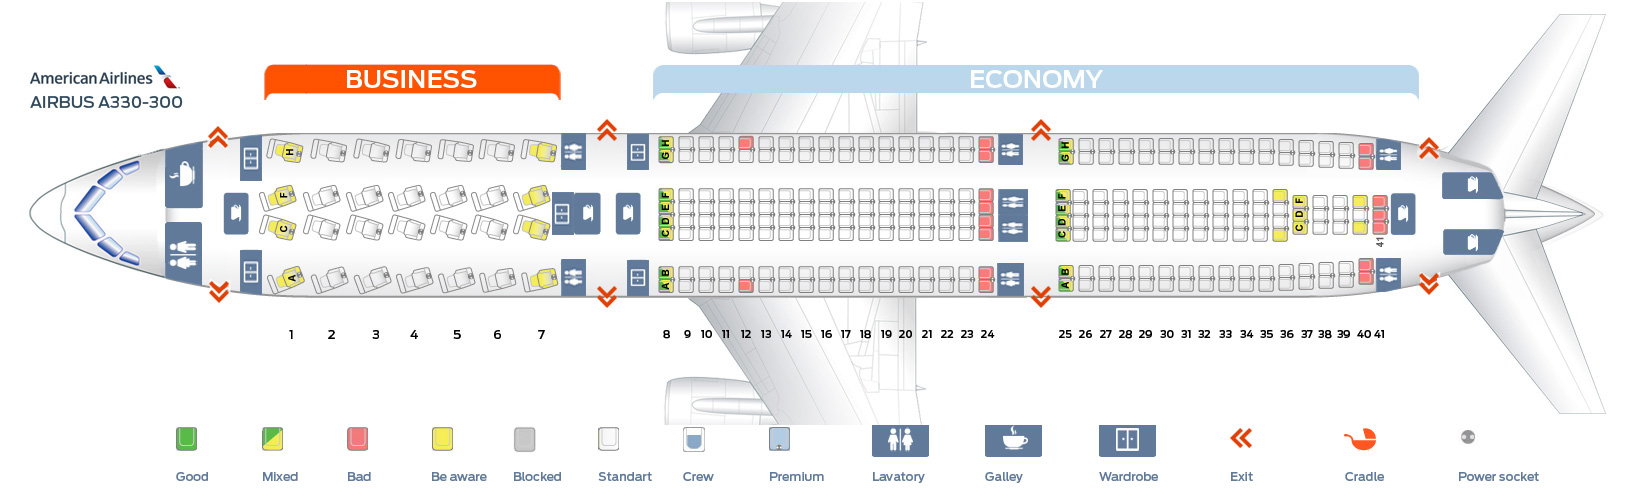 American Airlines Airbus A330 Seating Chart